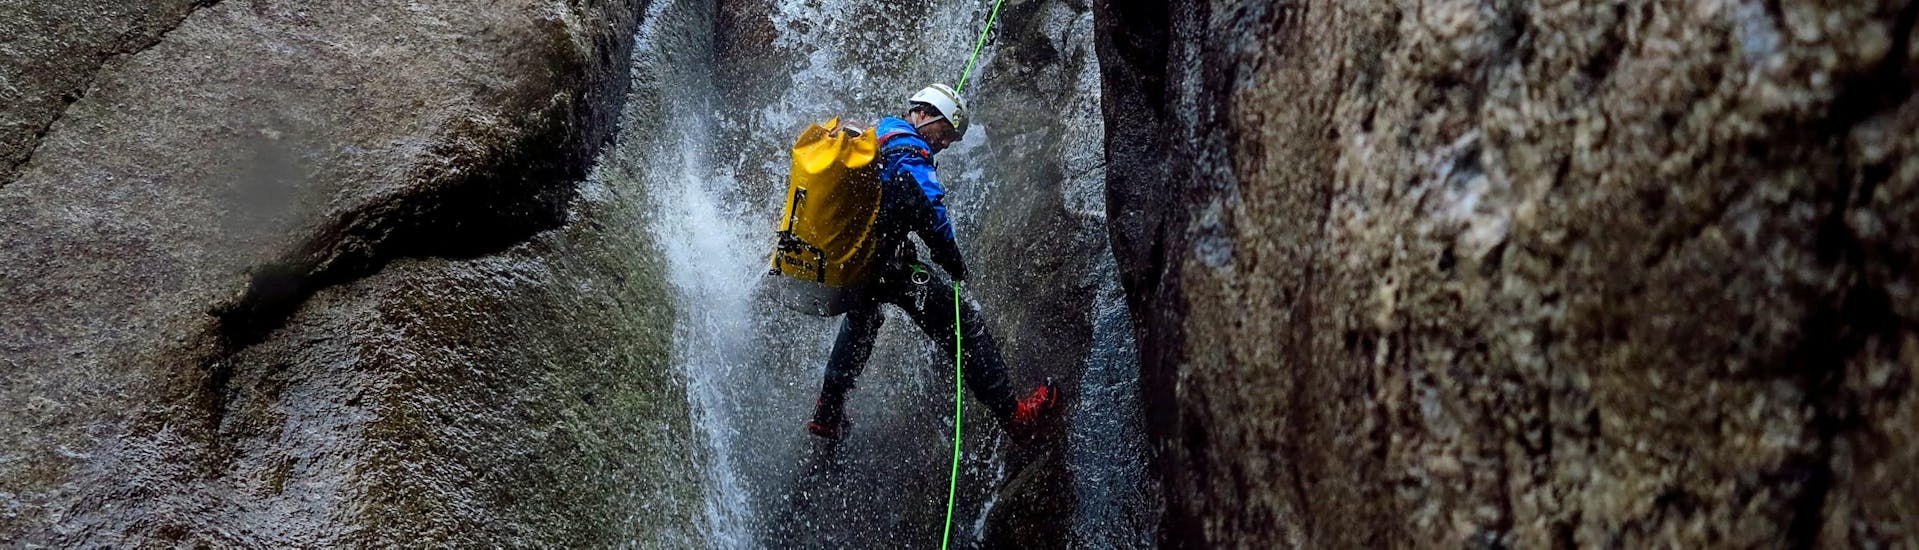 Sportliche Canyoning-Tour in Piode - Sorba.